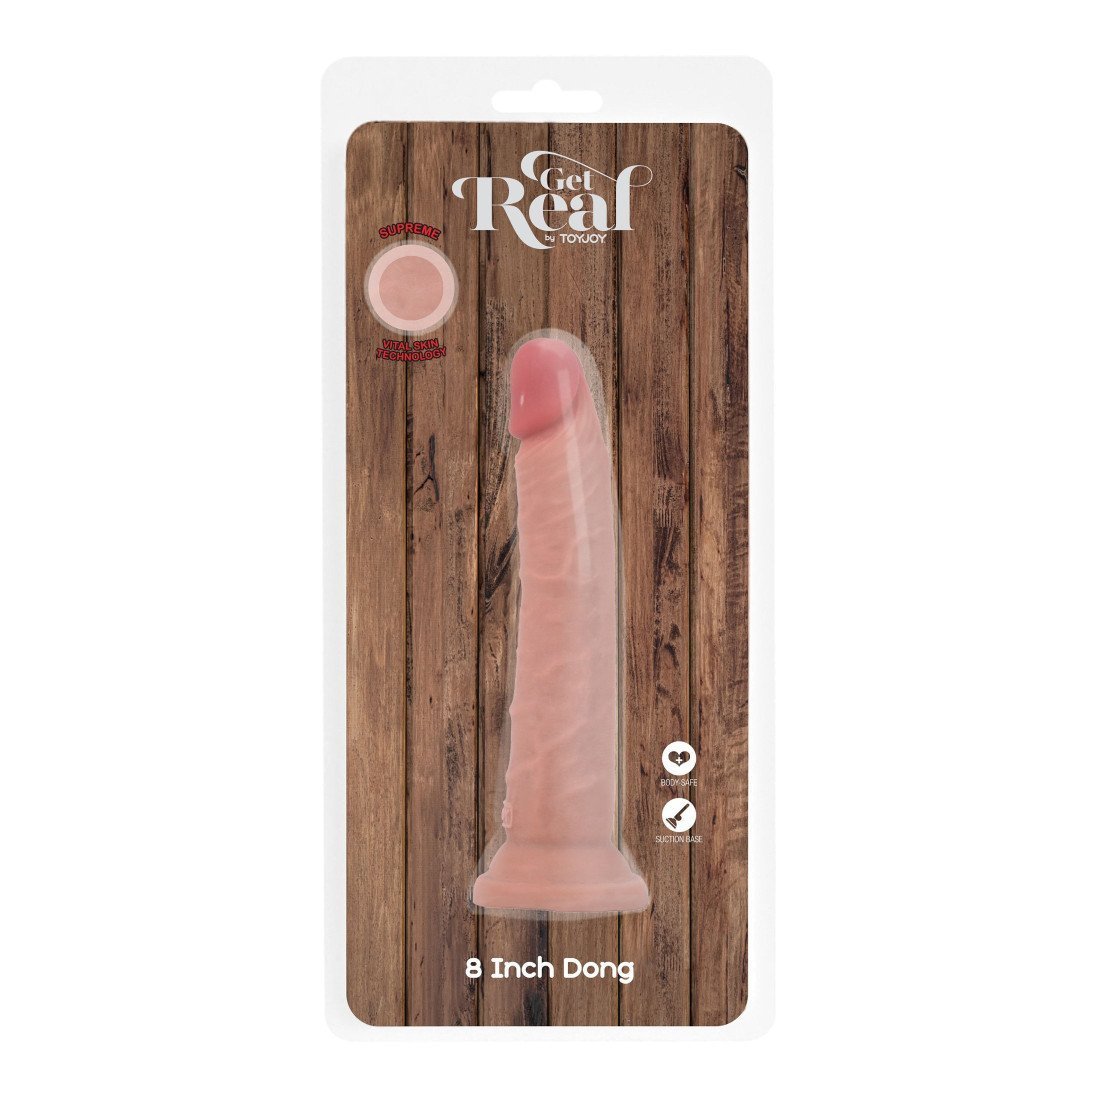 Dildo „Deluxe Dual Density Dong 8Inch“ - Get Real